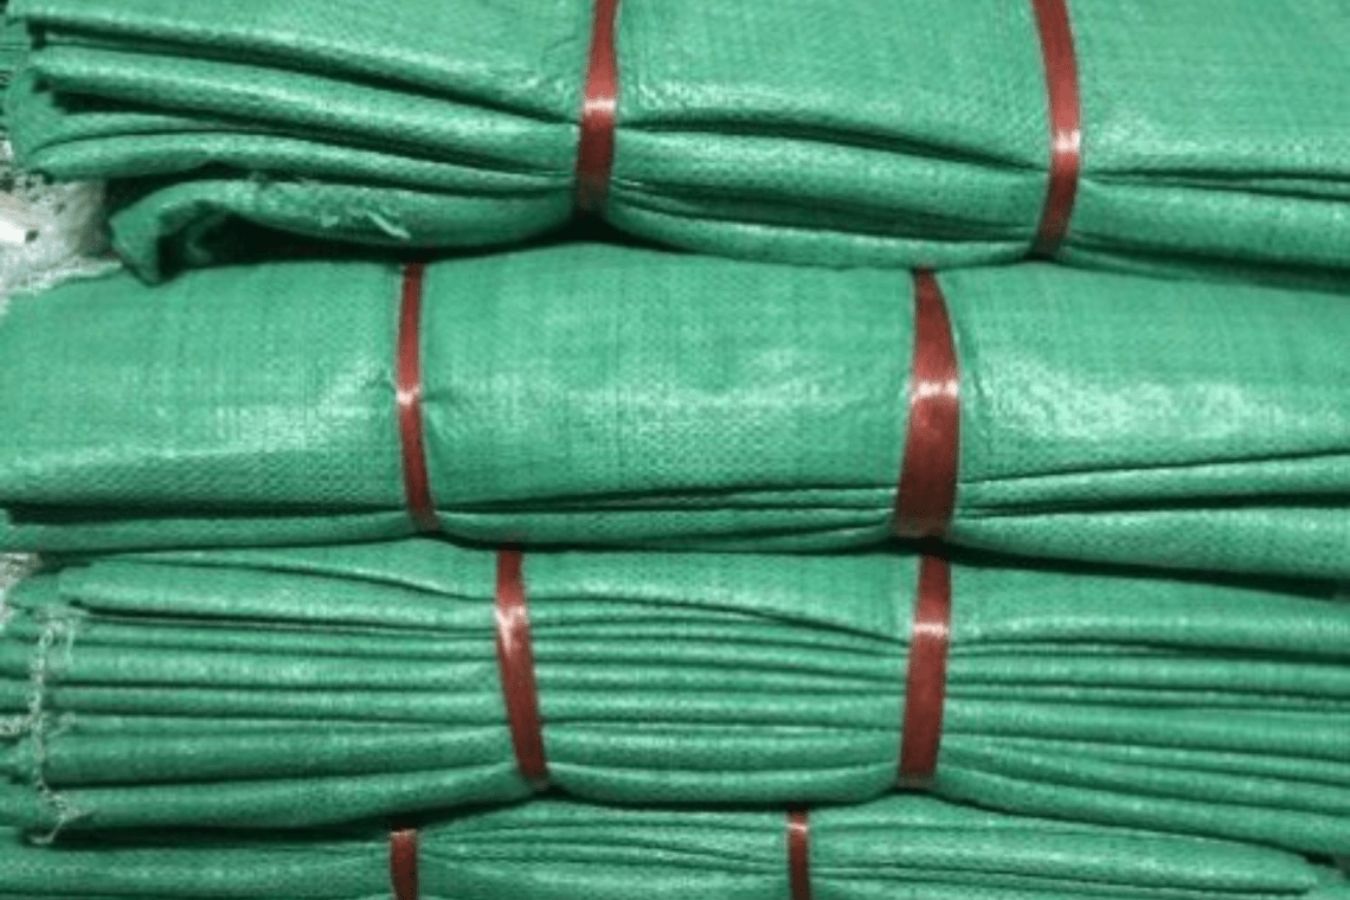 Types Of Packaging Materials For Green Coffee?